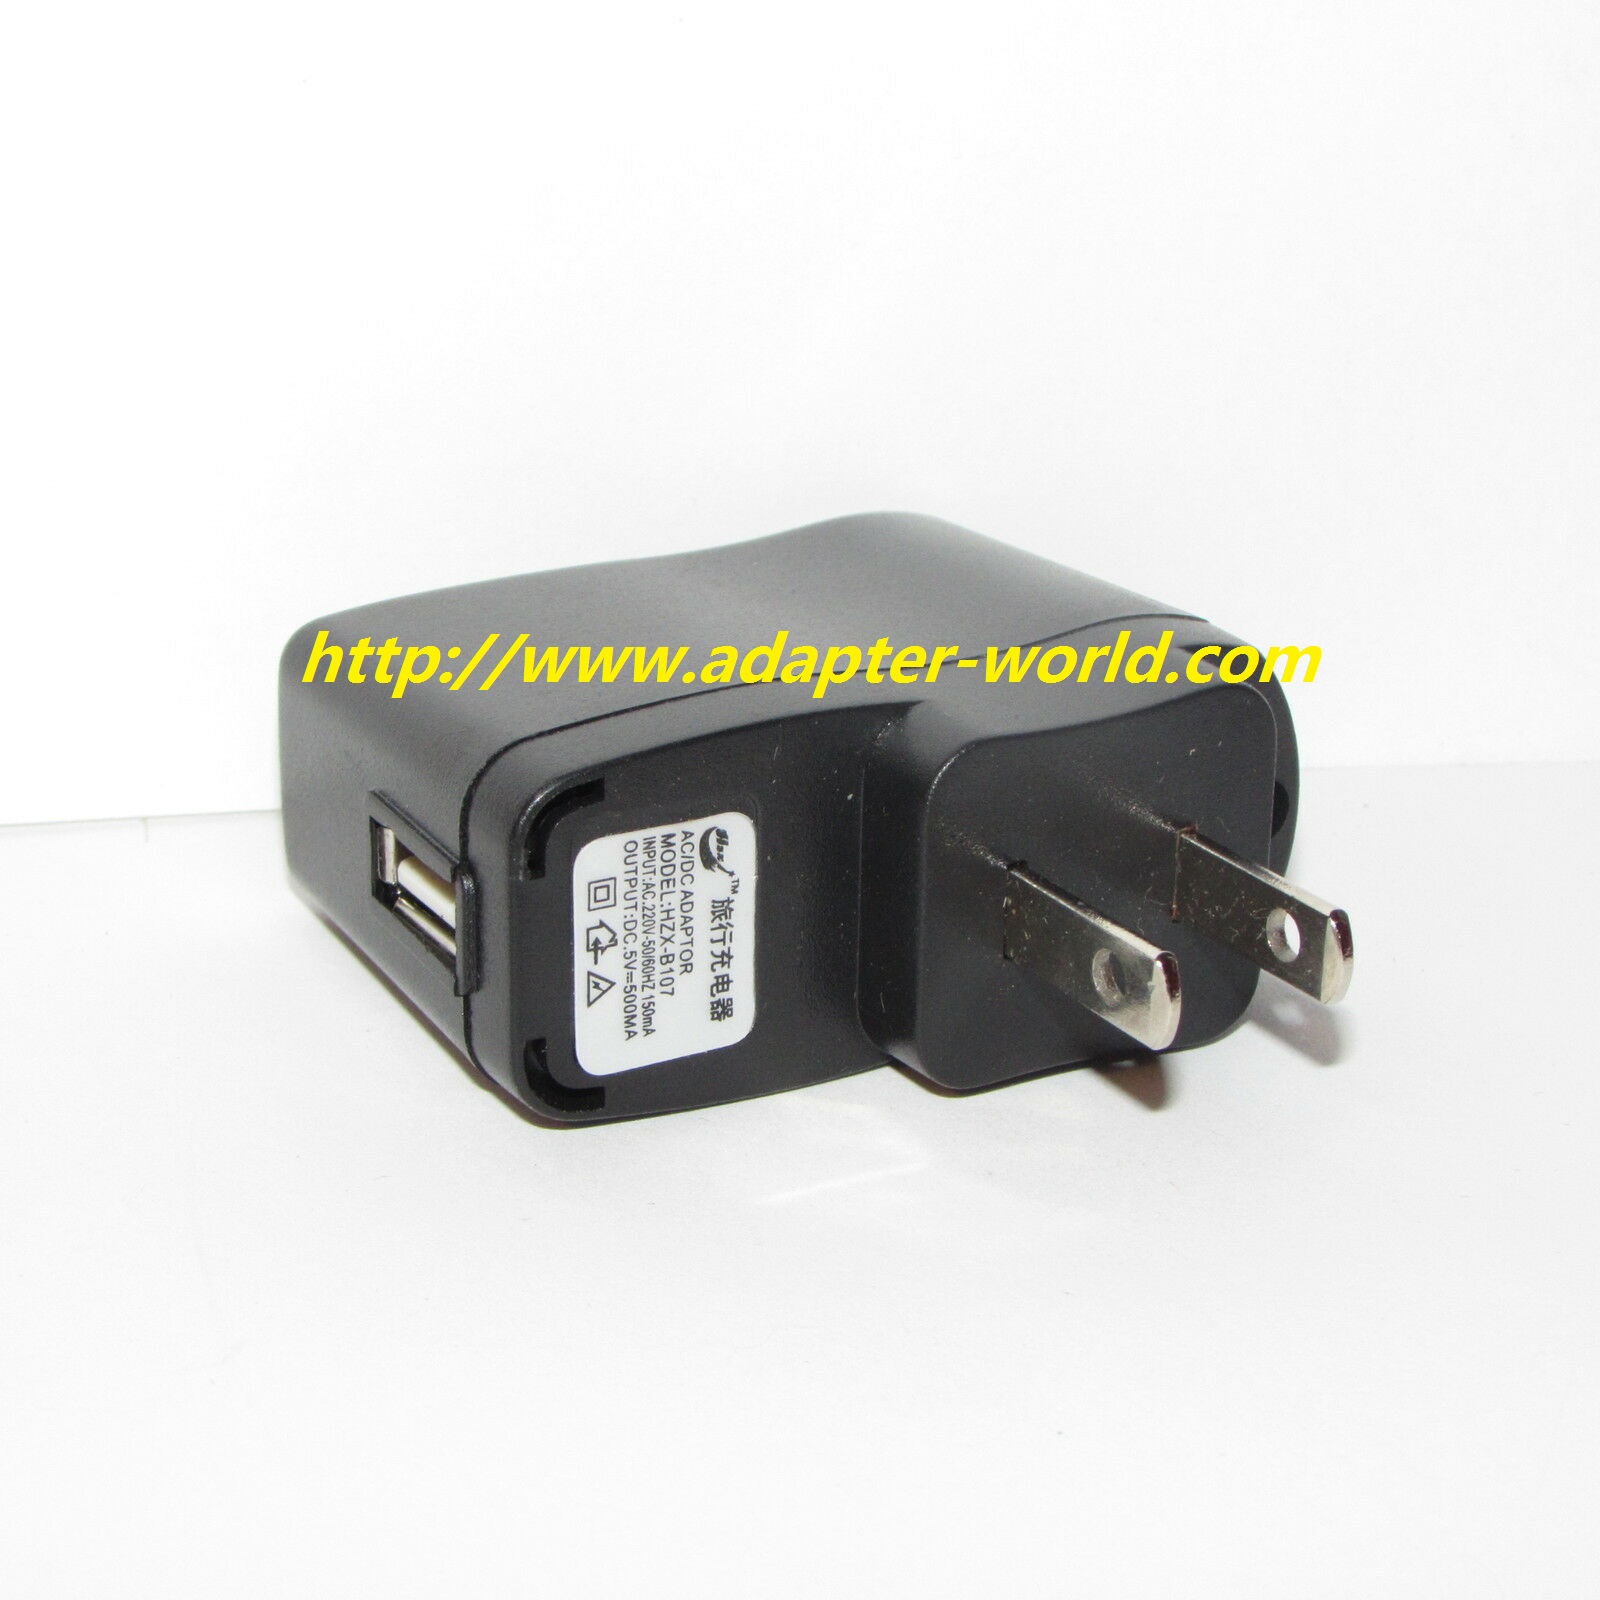 *100% Brand NEW* HZX-B107 7420037 AC/DC Wall Adapter Power Supply Free Shipping!